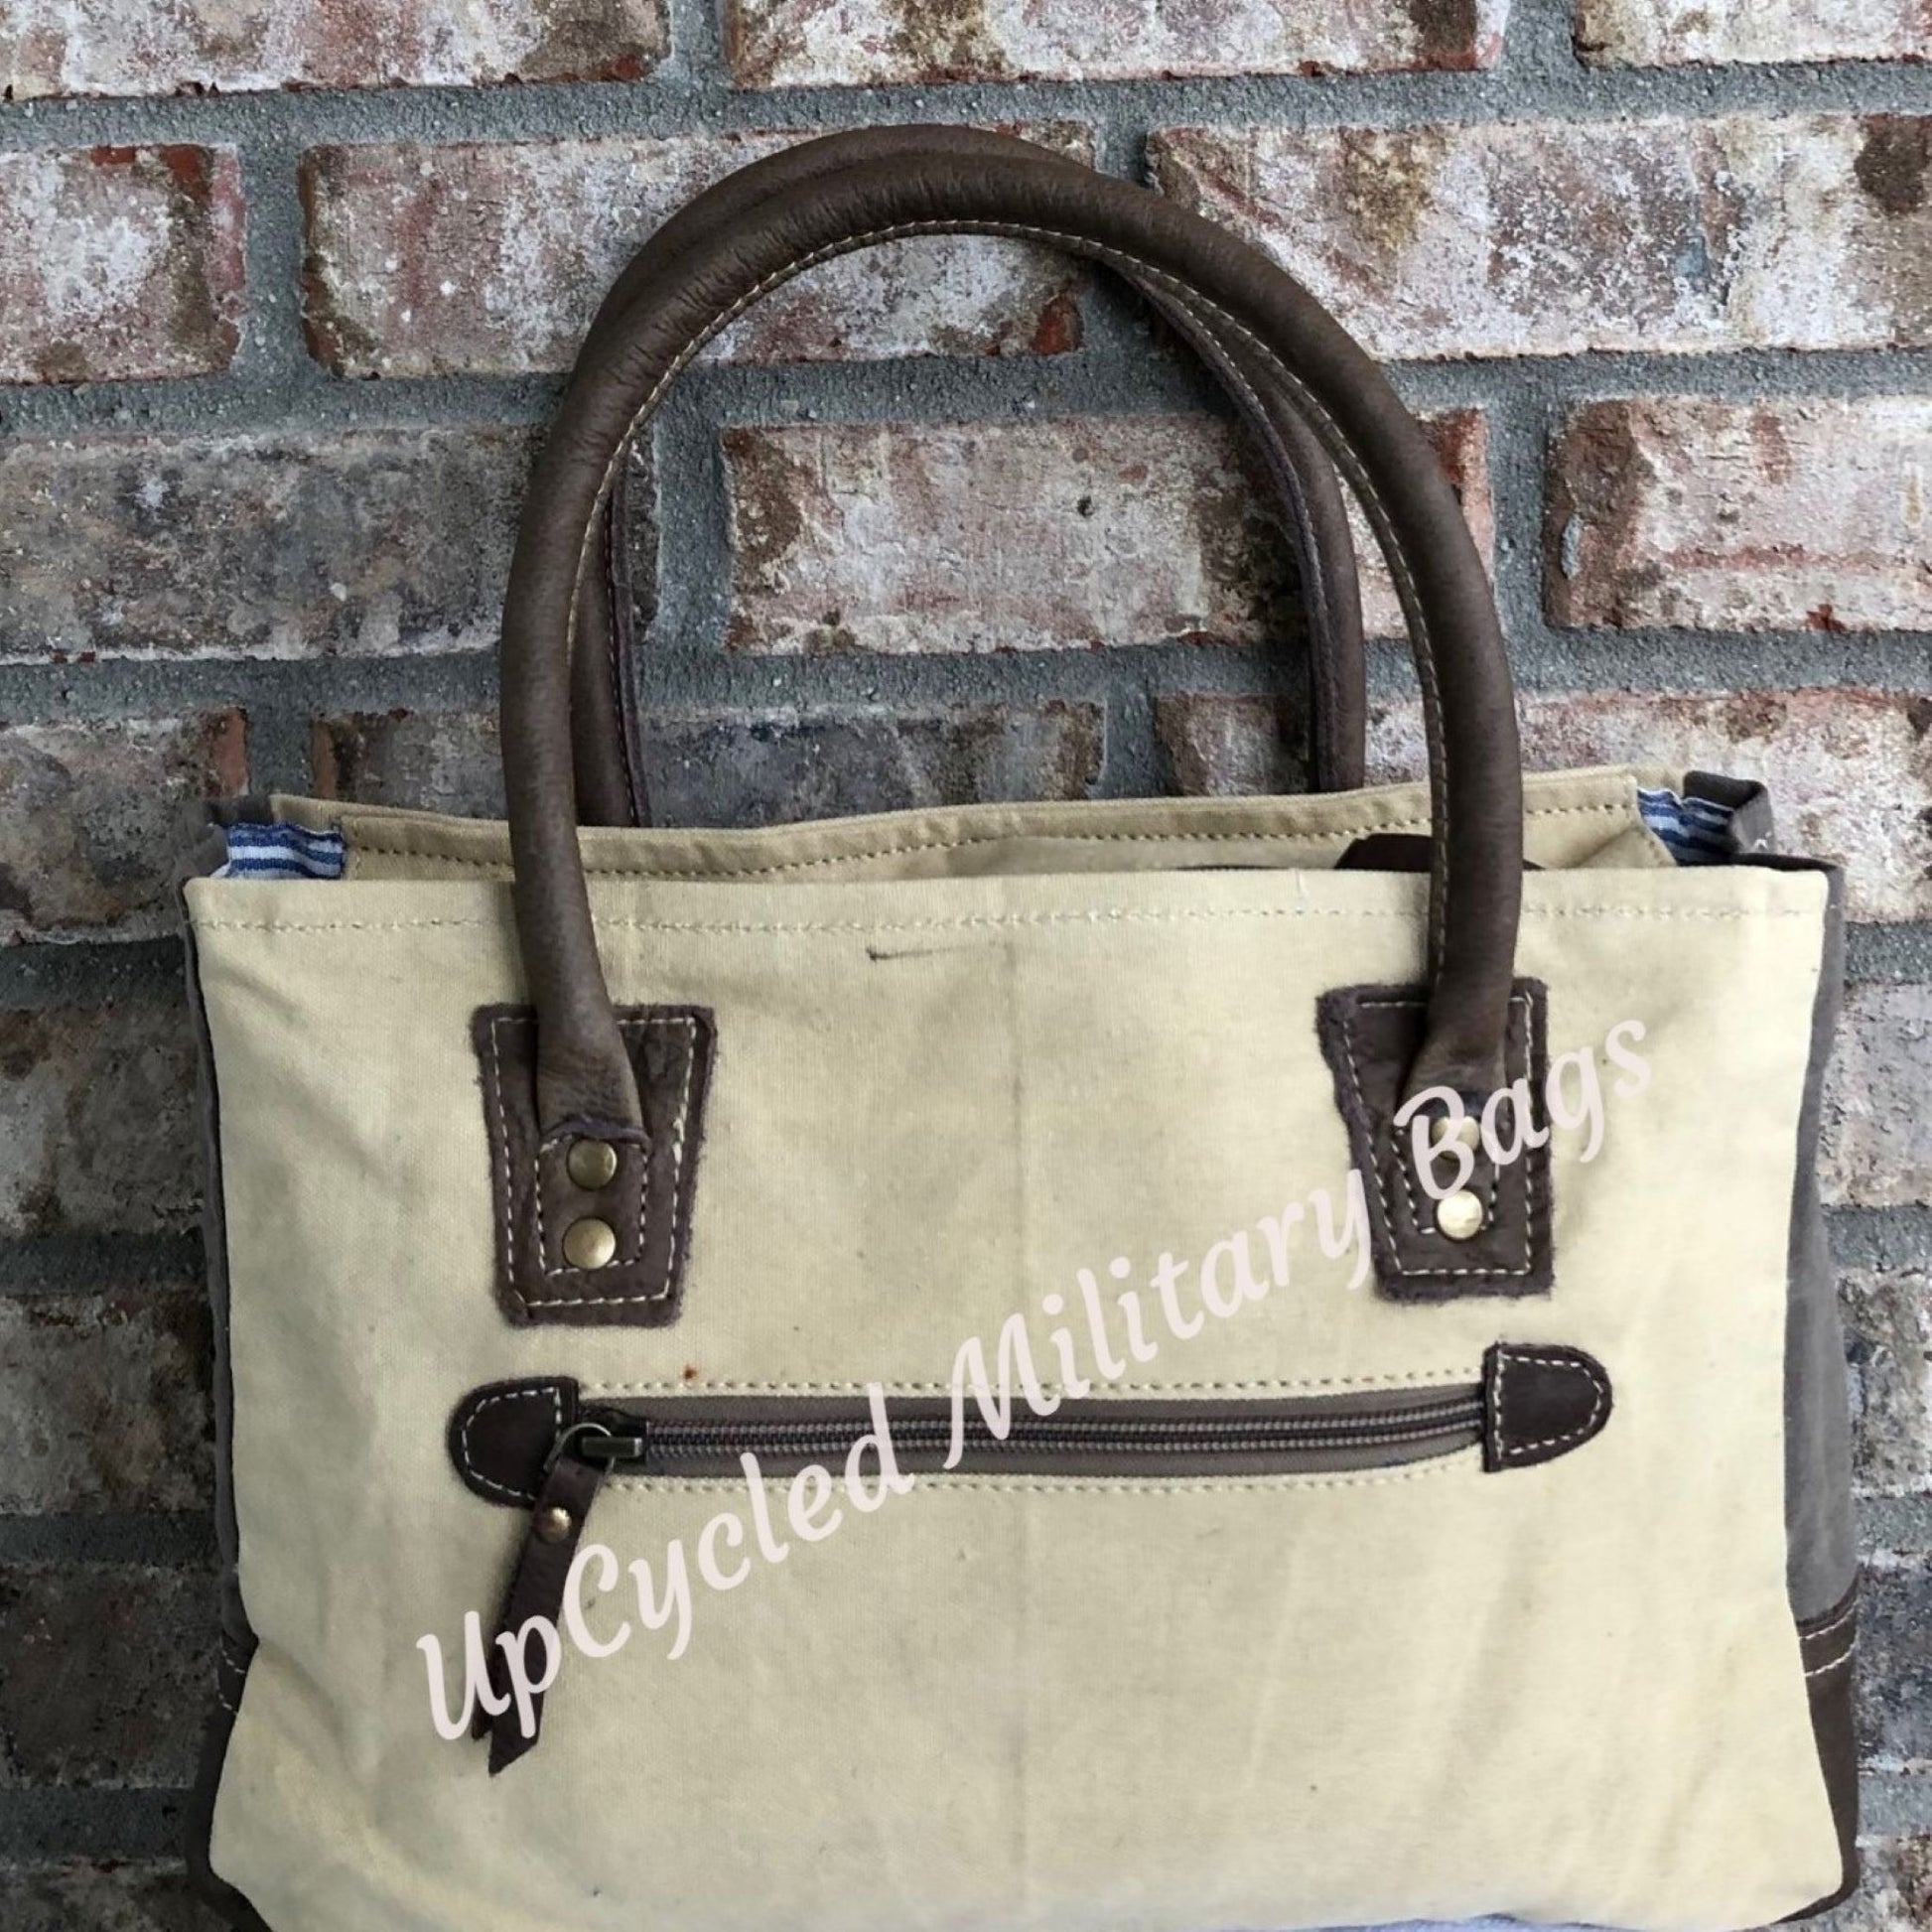 The UpCycled Vintage Buck Shoulder Bag / Tote is made from repurposed military tent and tarp canvas!  This purse gives off a vintage vibe with the Original Vintage Buck on the front.  It provides comfort with padded handles.  It has a zippered back pocket, a zipped inside pocket and is fully lined.